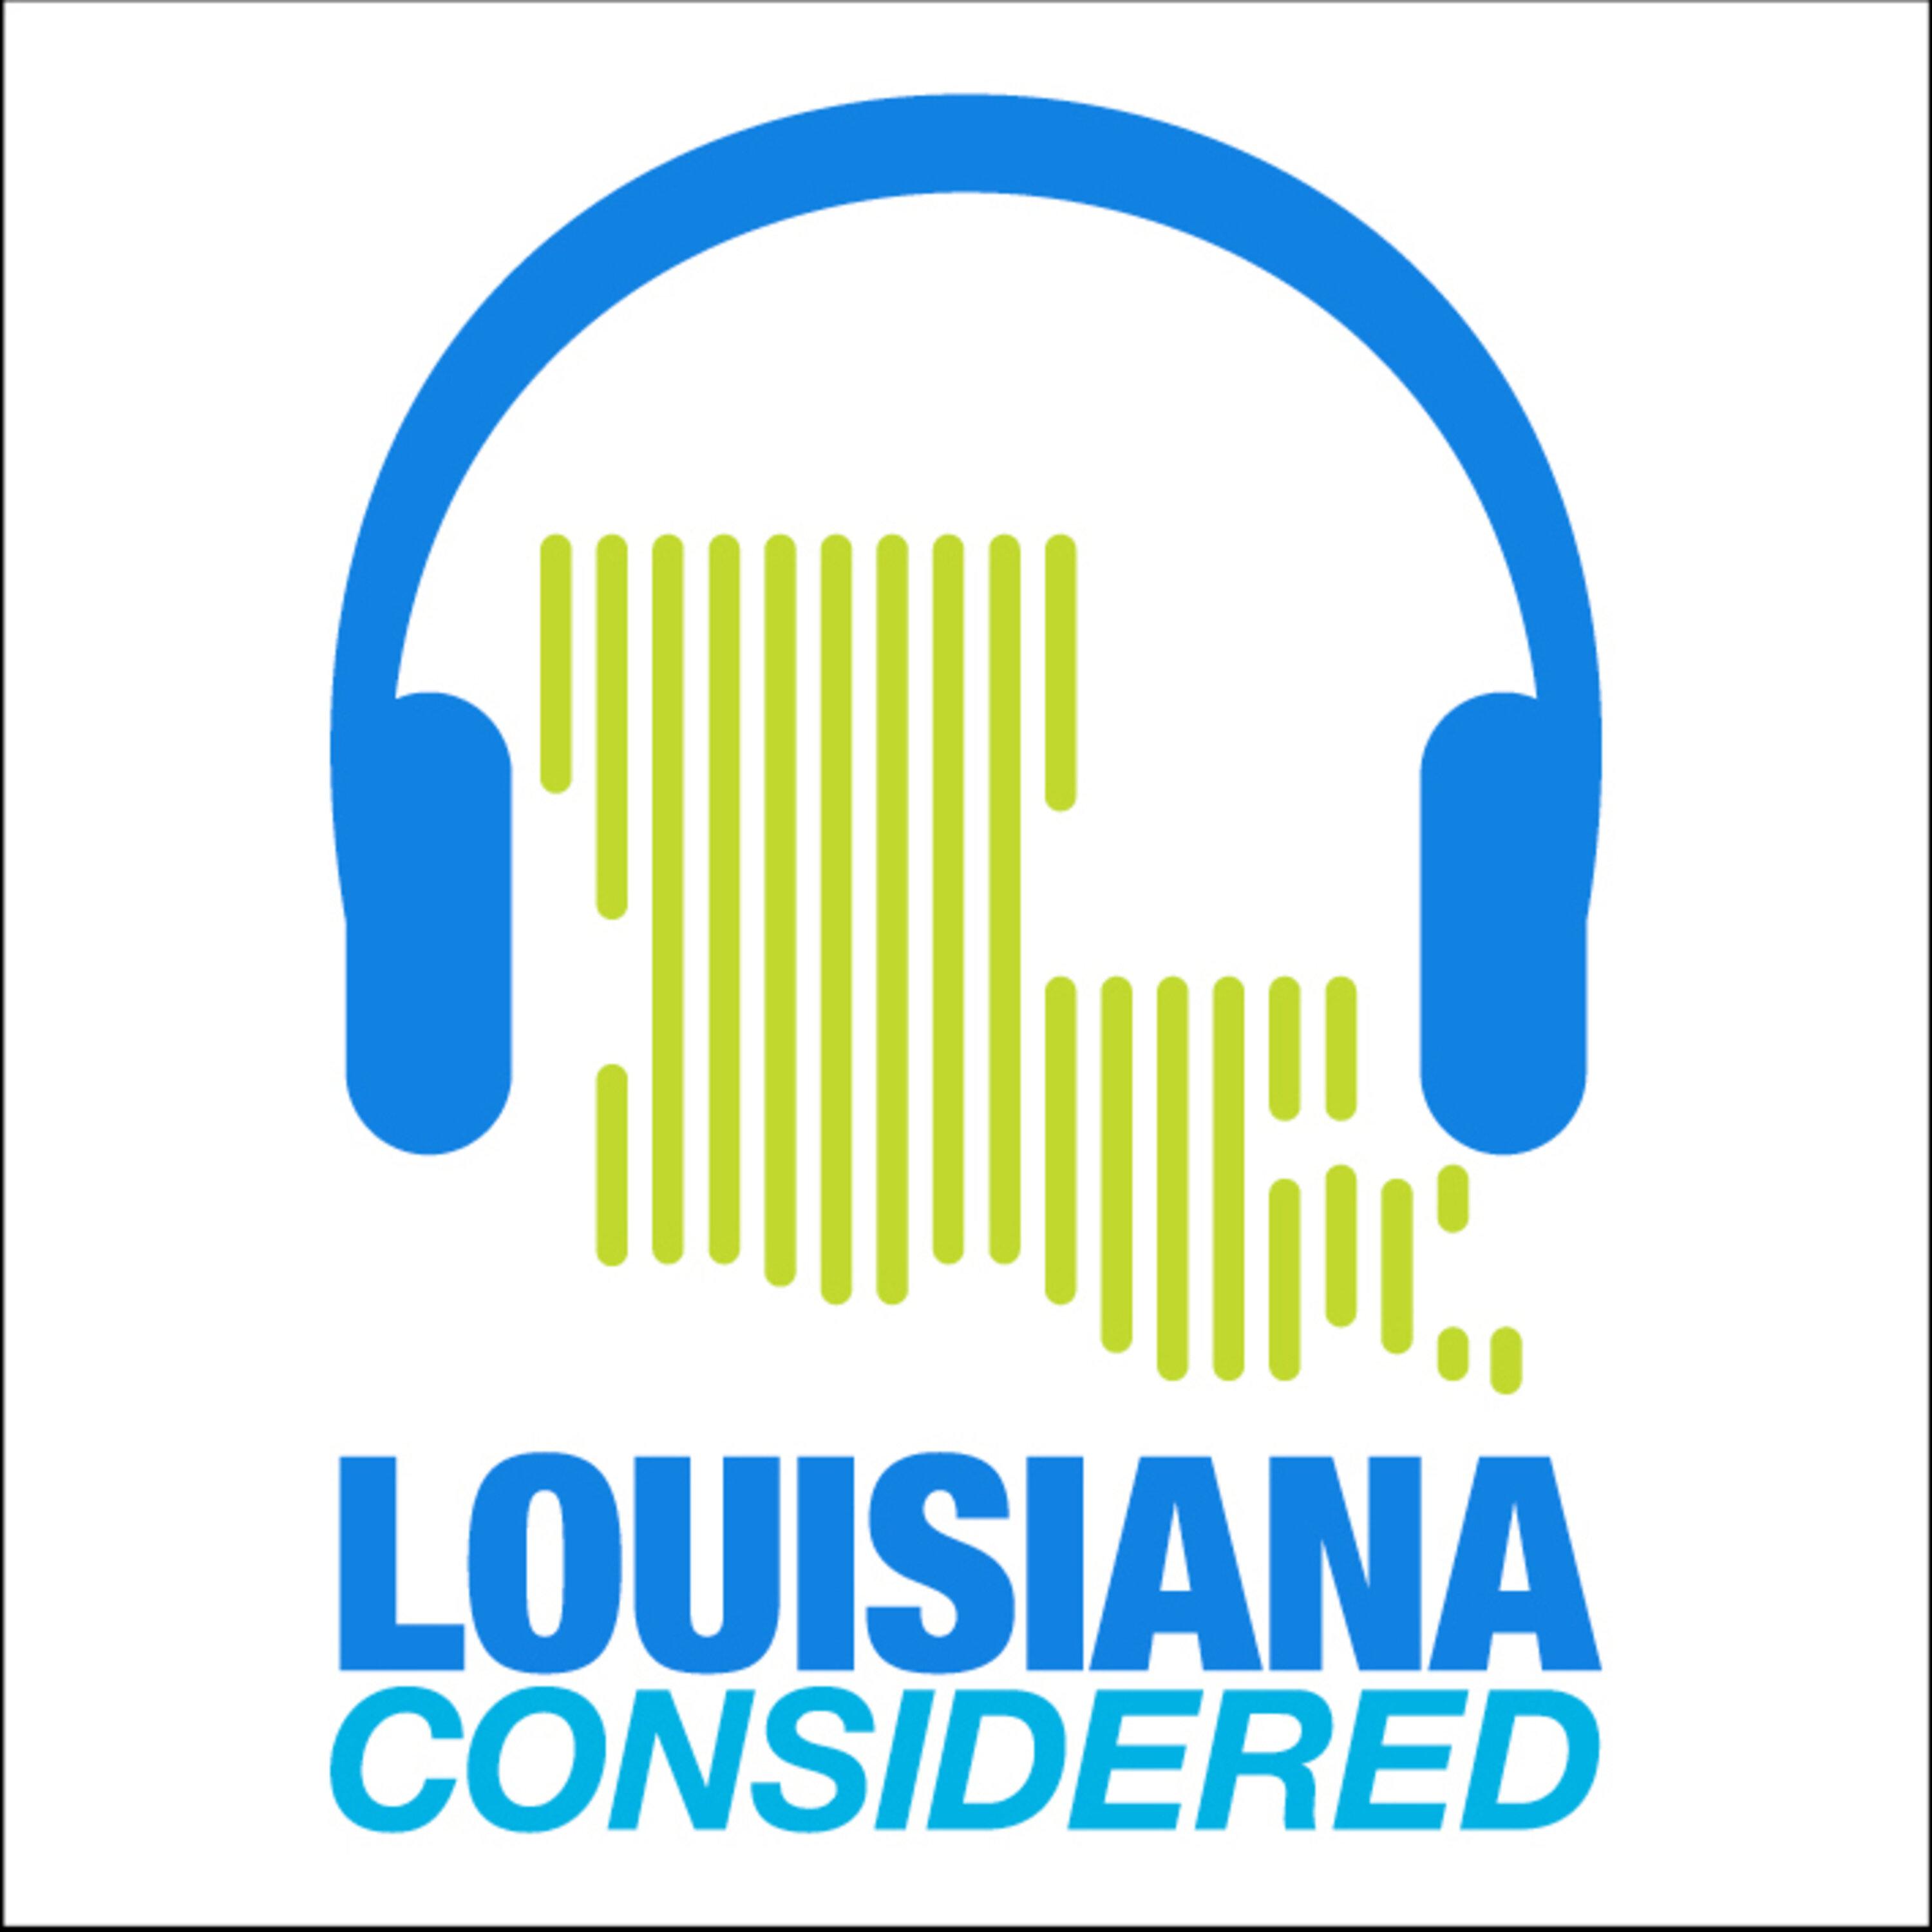 Thumbnail for "Louisiana Considered: Some Louisiana Law Enforcement Oppose Lifting Concealed Carry Restrictions, Louisiana’s Small Businesses Recover From Pandemic".